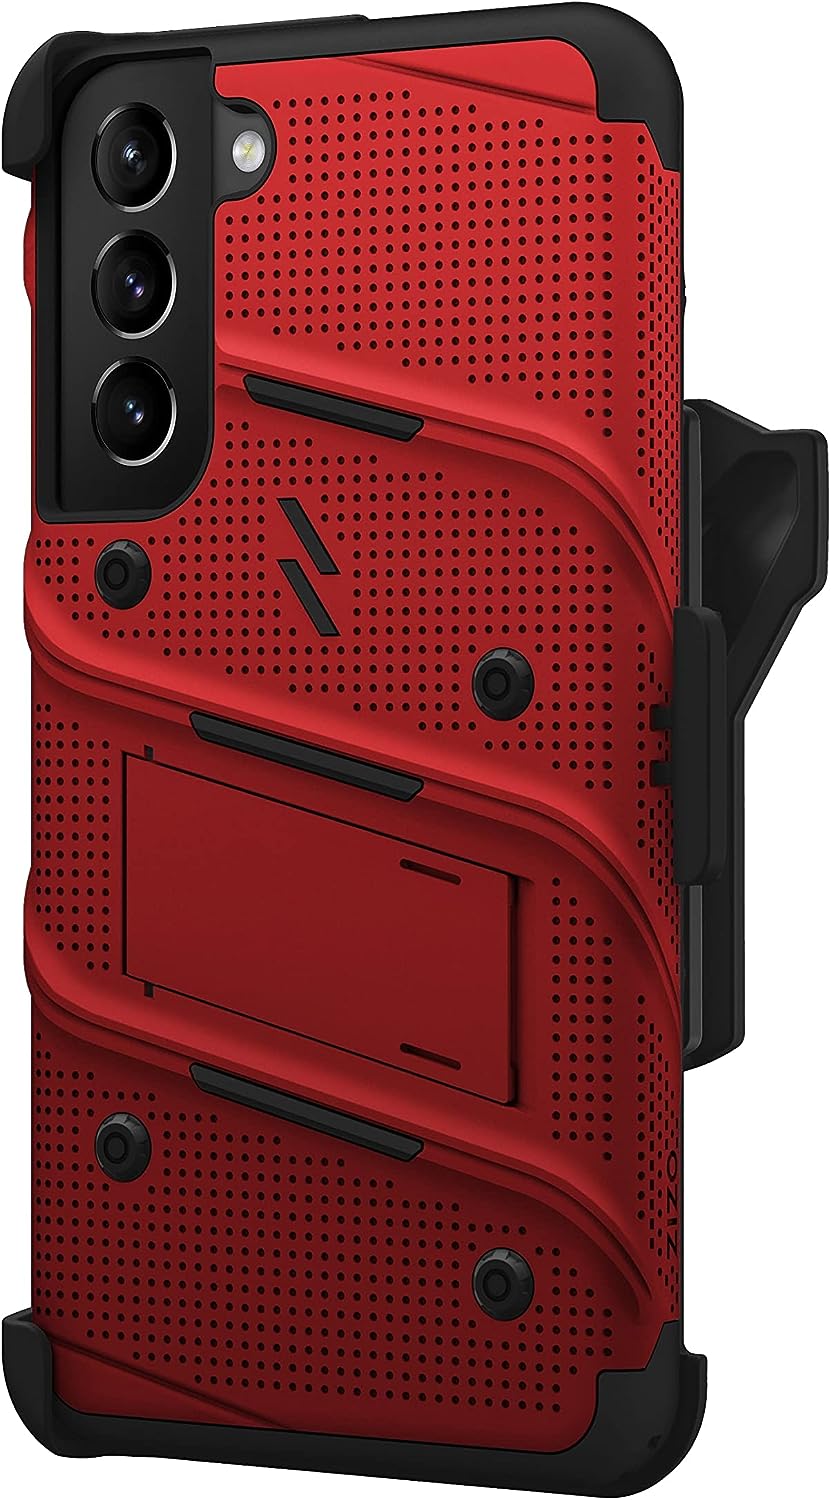 ZIZO Bolt Samsung Galaxy S22 Plus - Holster Case with Tempered Glass, Built-in Kickstand & Lanyard (3 Colors)